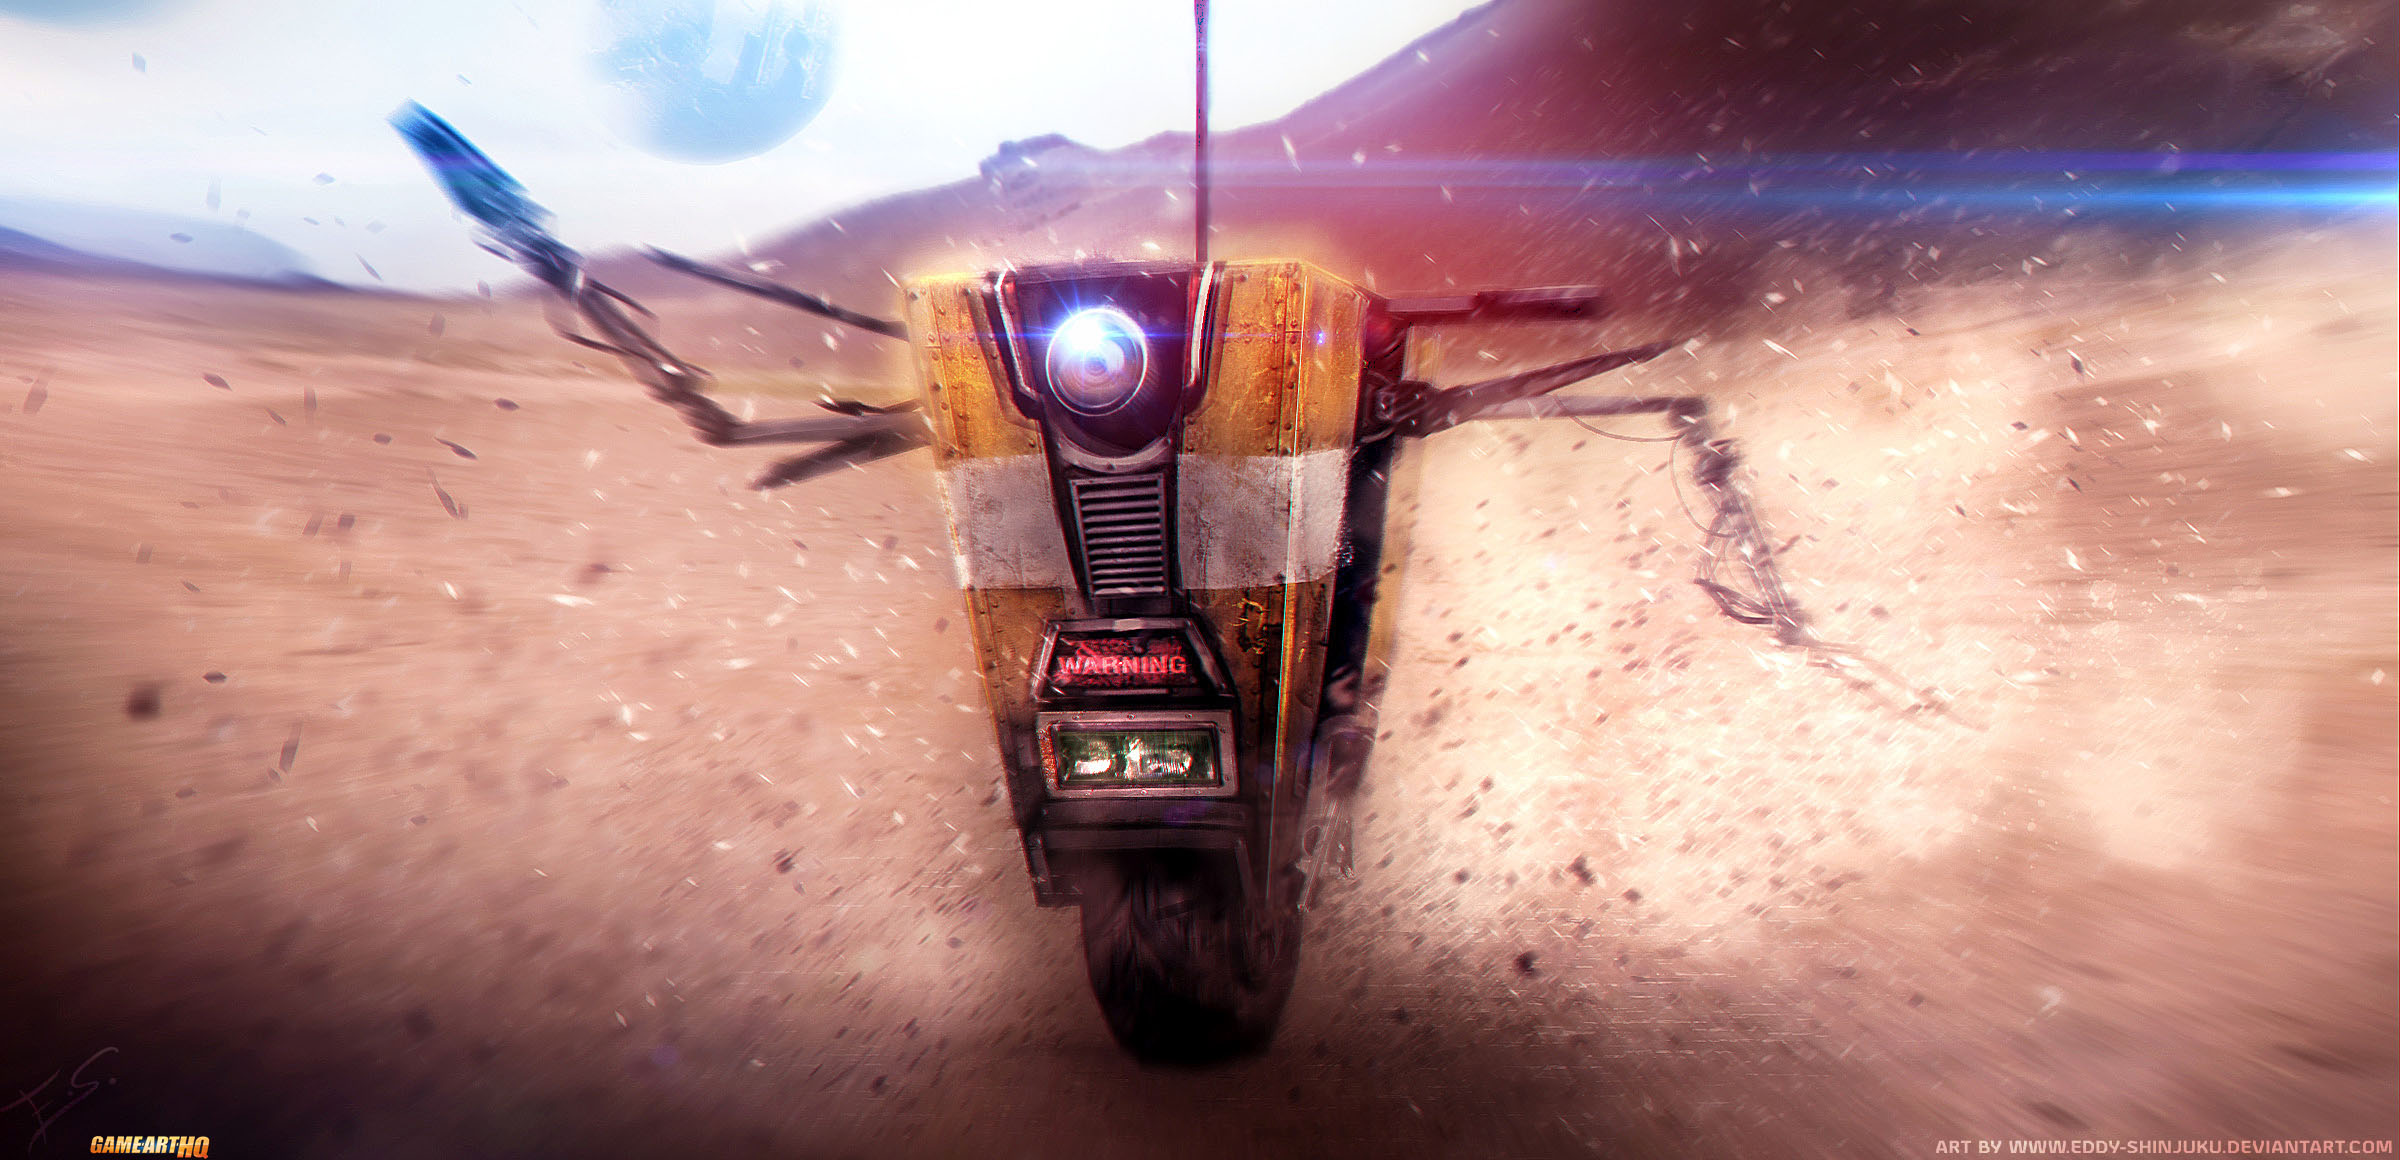 Claptrap from the Borderlands Series